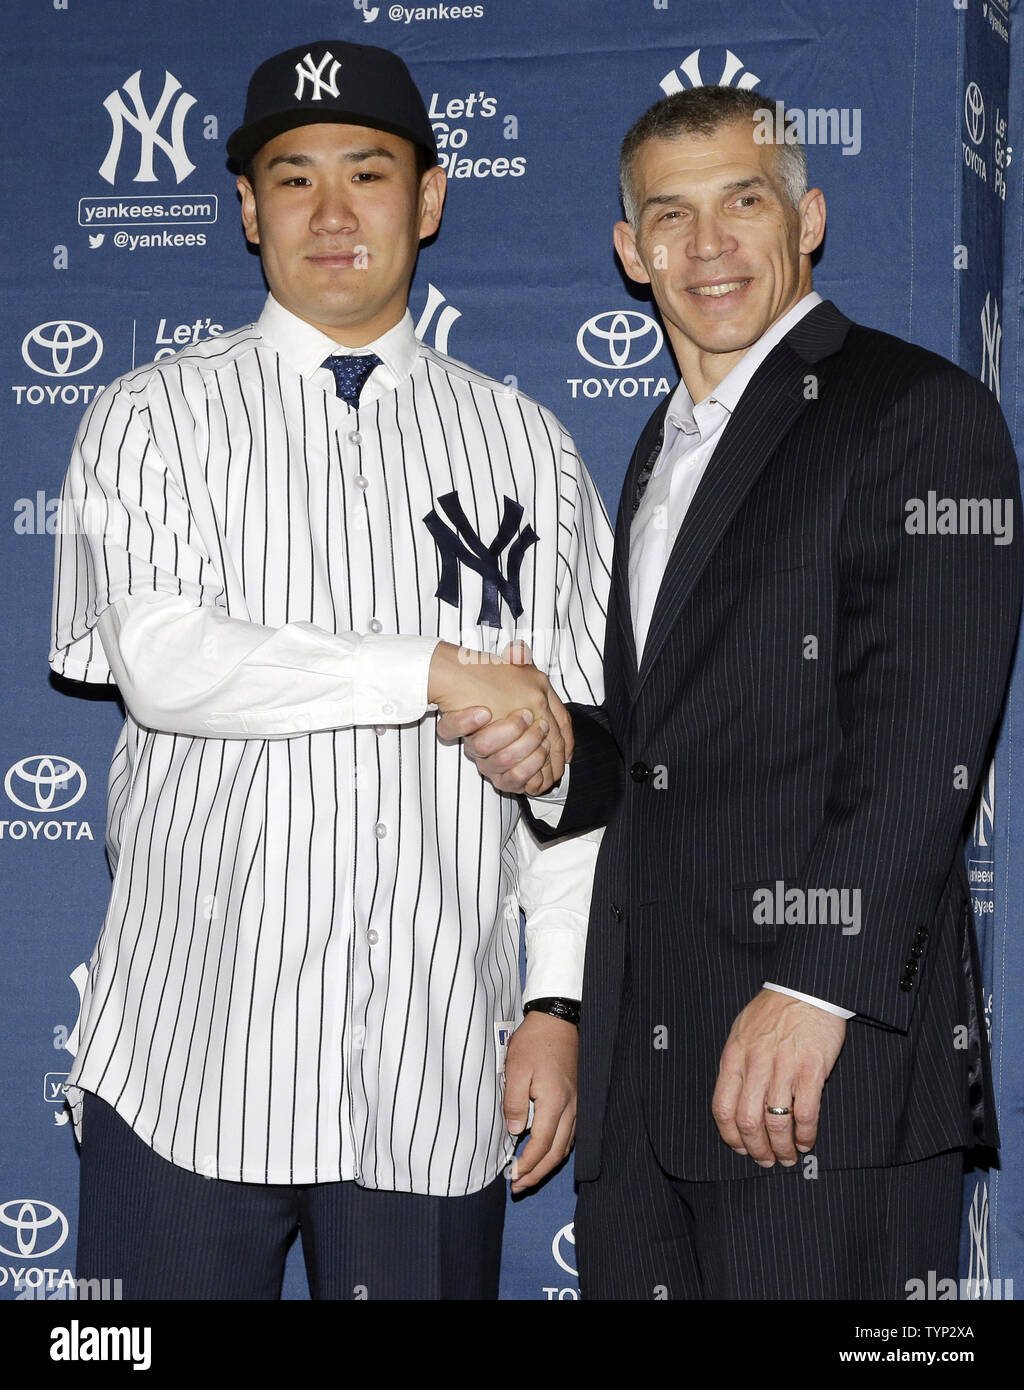 New York Yankees Manager Joe Girardi shakes hands with Masahiro Tanaka who  is wearing his new Yankees jersey and cap at a press conference at Yankee  Stadium in New York City on